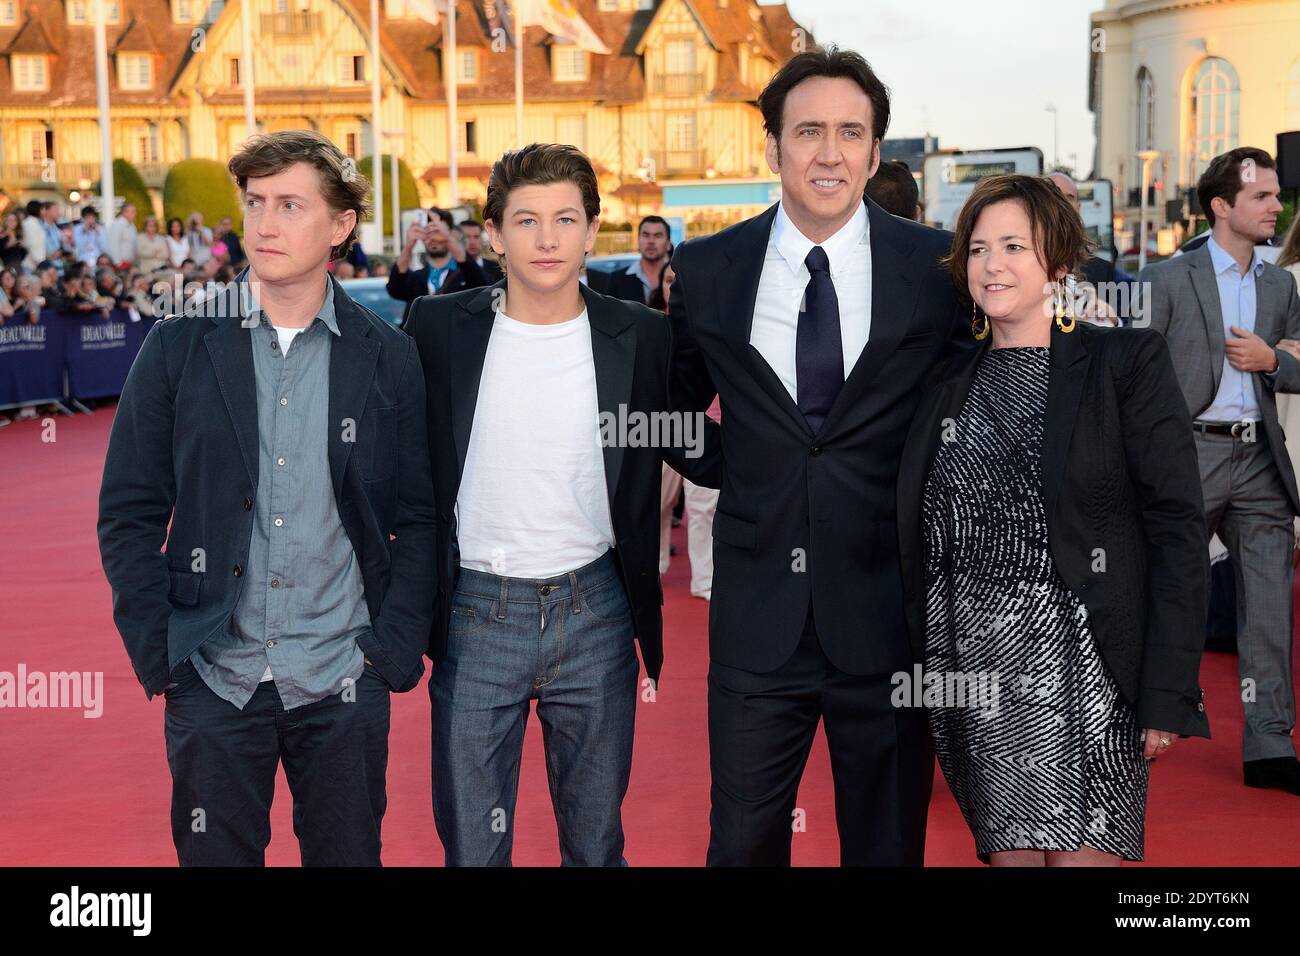 David Gordon, Tye Sheridan, Nicolas Cage and Lisa Muskat attending the screening of 'Joe' as part of the 39th Deauville American Film Festival in Deauville, France on September 2, 2013. Photo by Nicolas Briquet/ABACAPRESS.COM Stock Photo